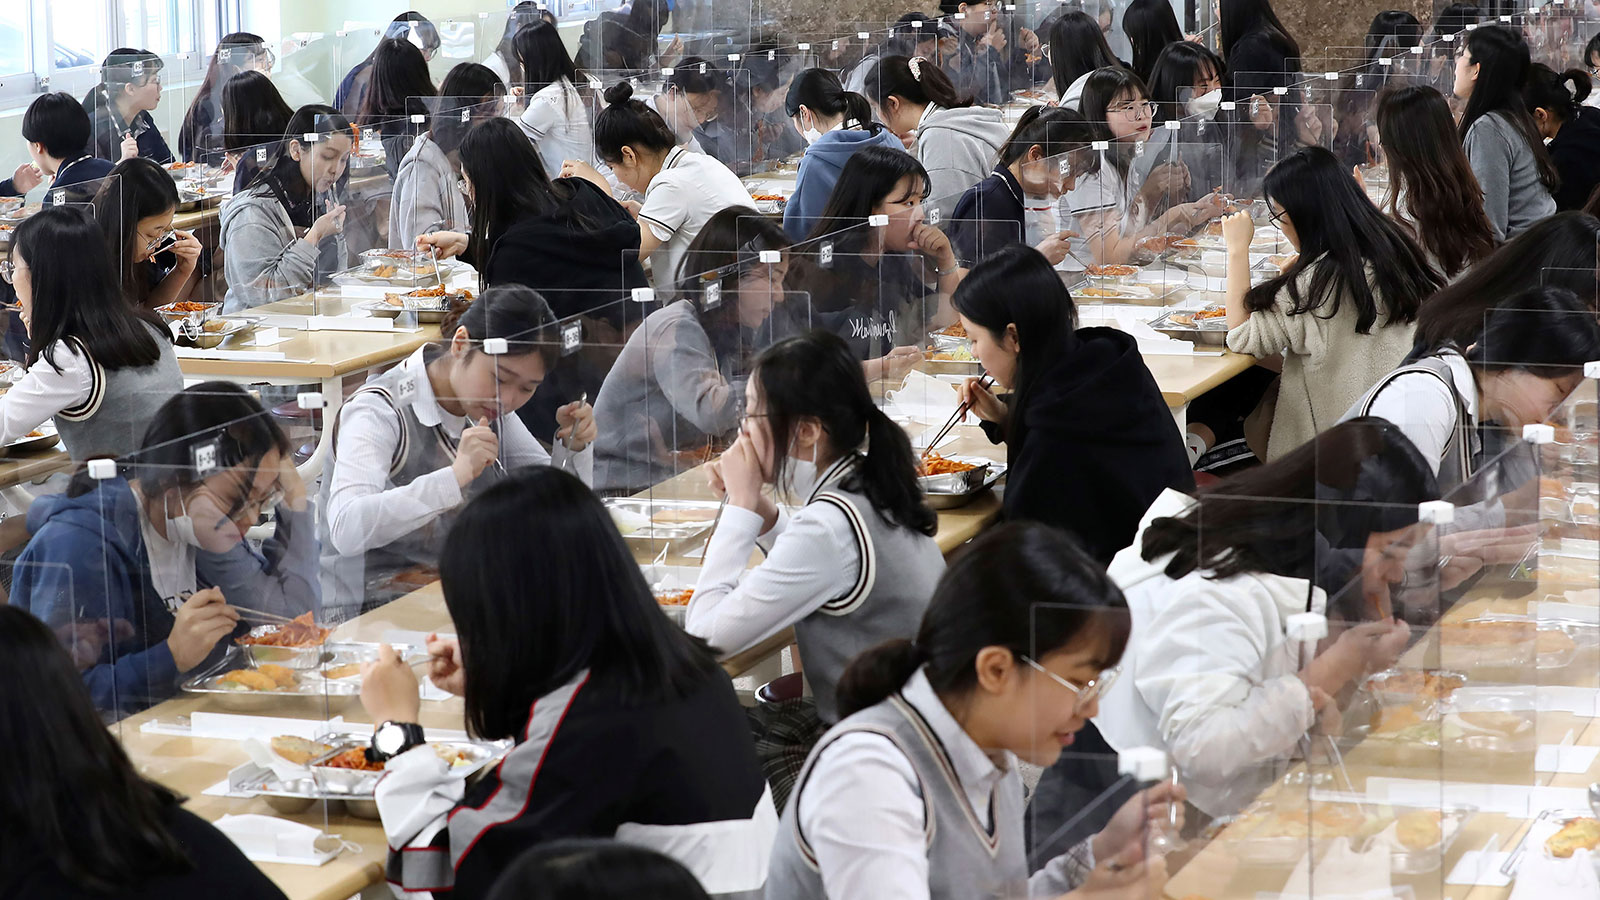 Senior students eat lunch at tables equipped with plastic barriers to prevent possible spread of the novel coronavirus in the cafeteria at Jeonmin High School in Daejeon, South Korea on May 20.